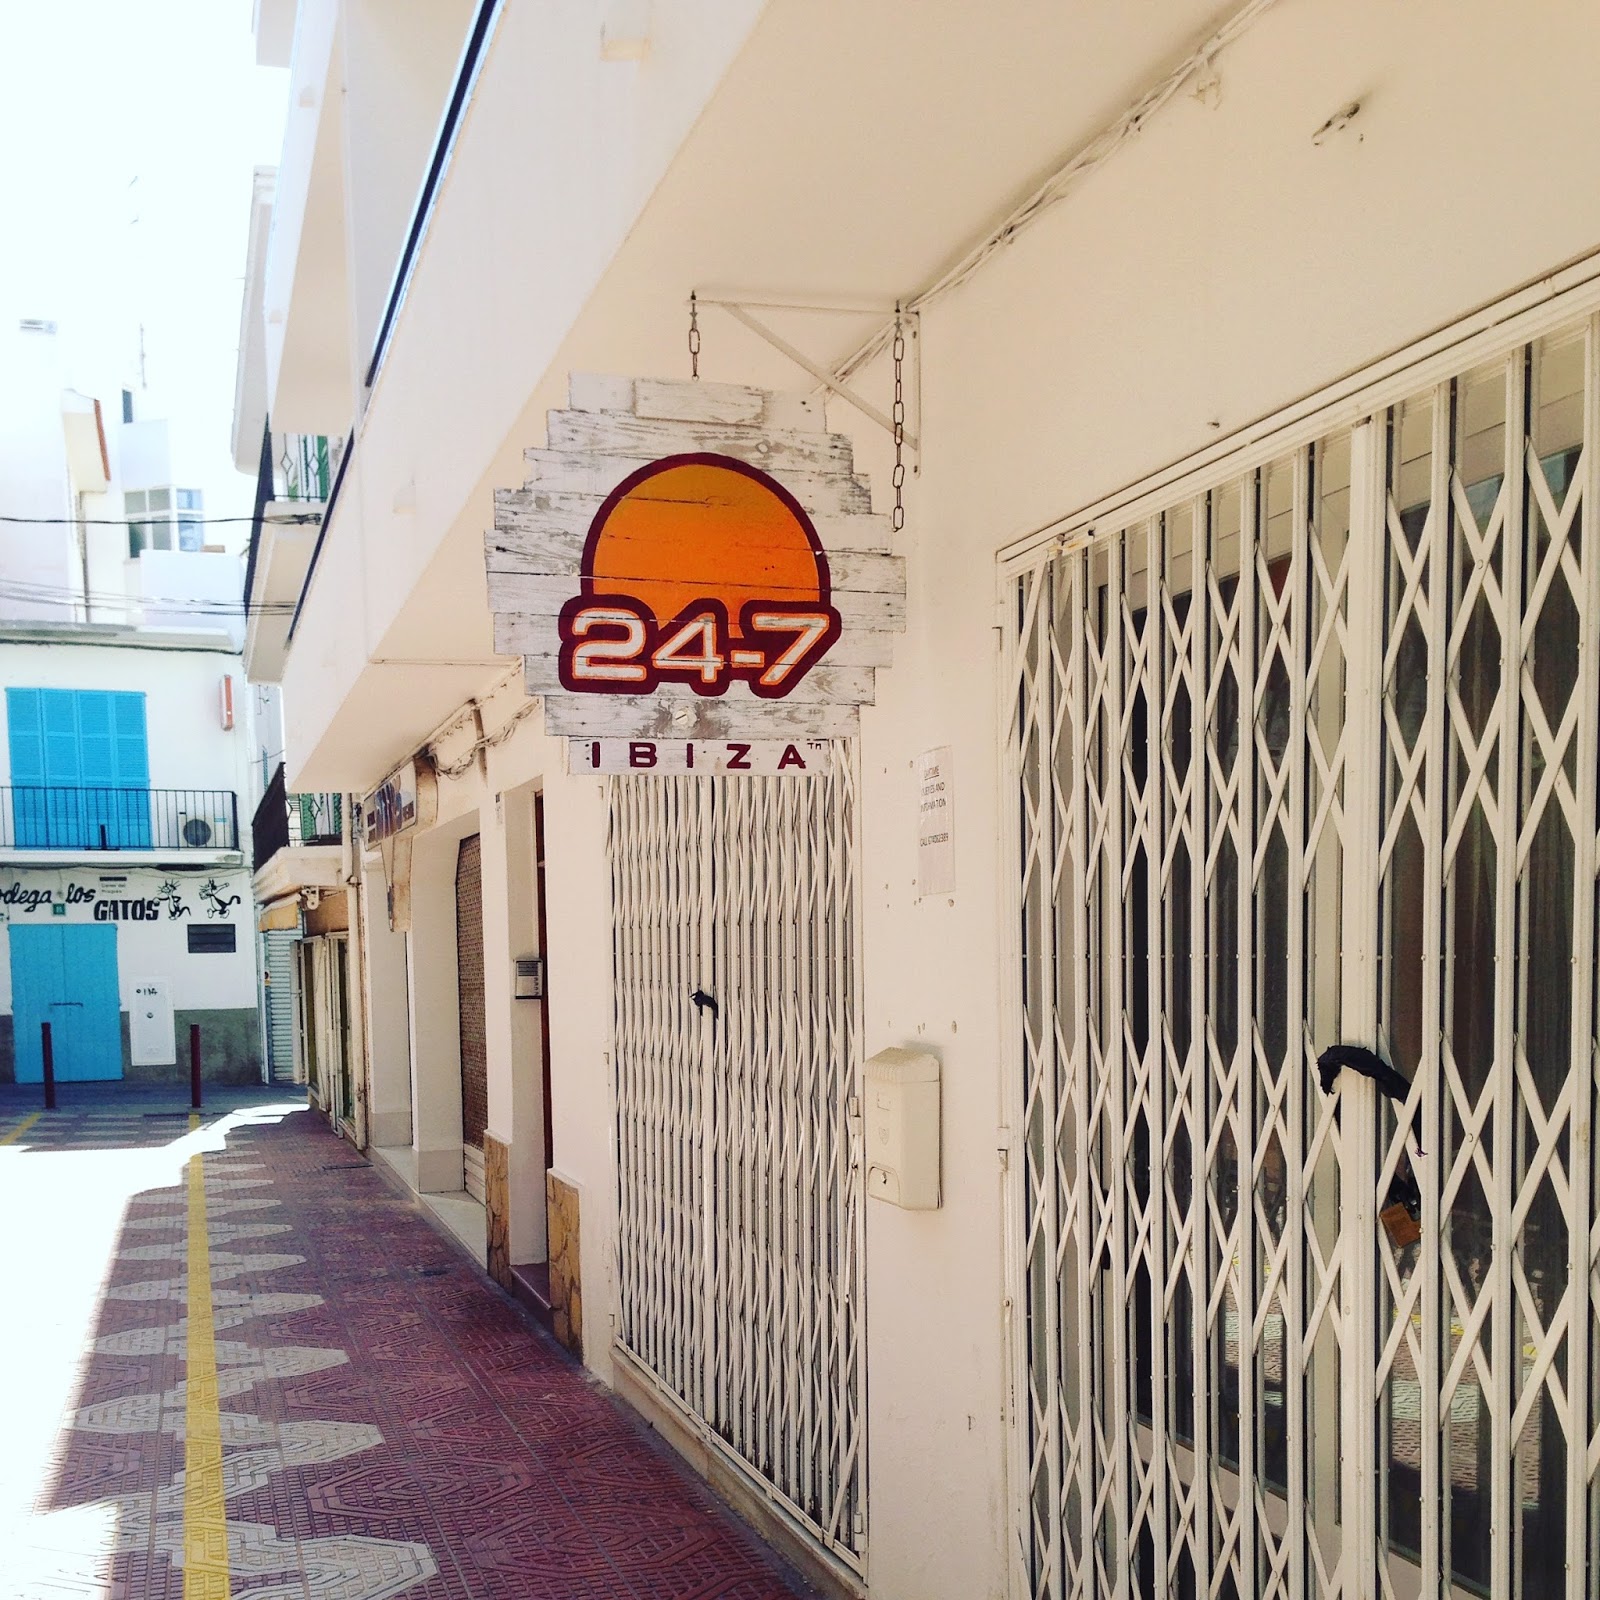 Finding Beauty on the Streets of Ibiza